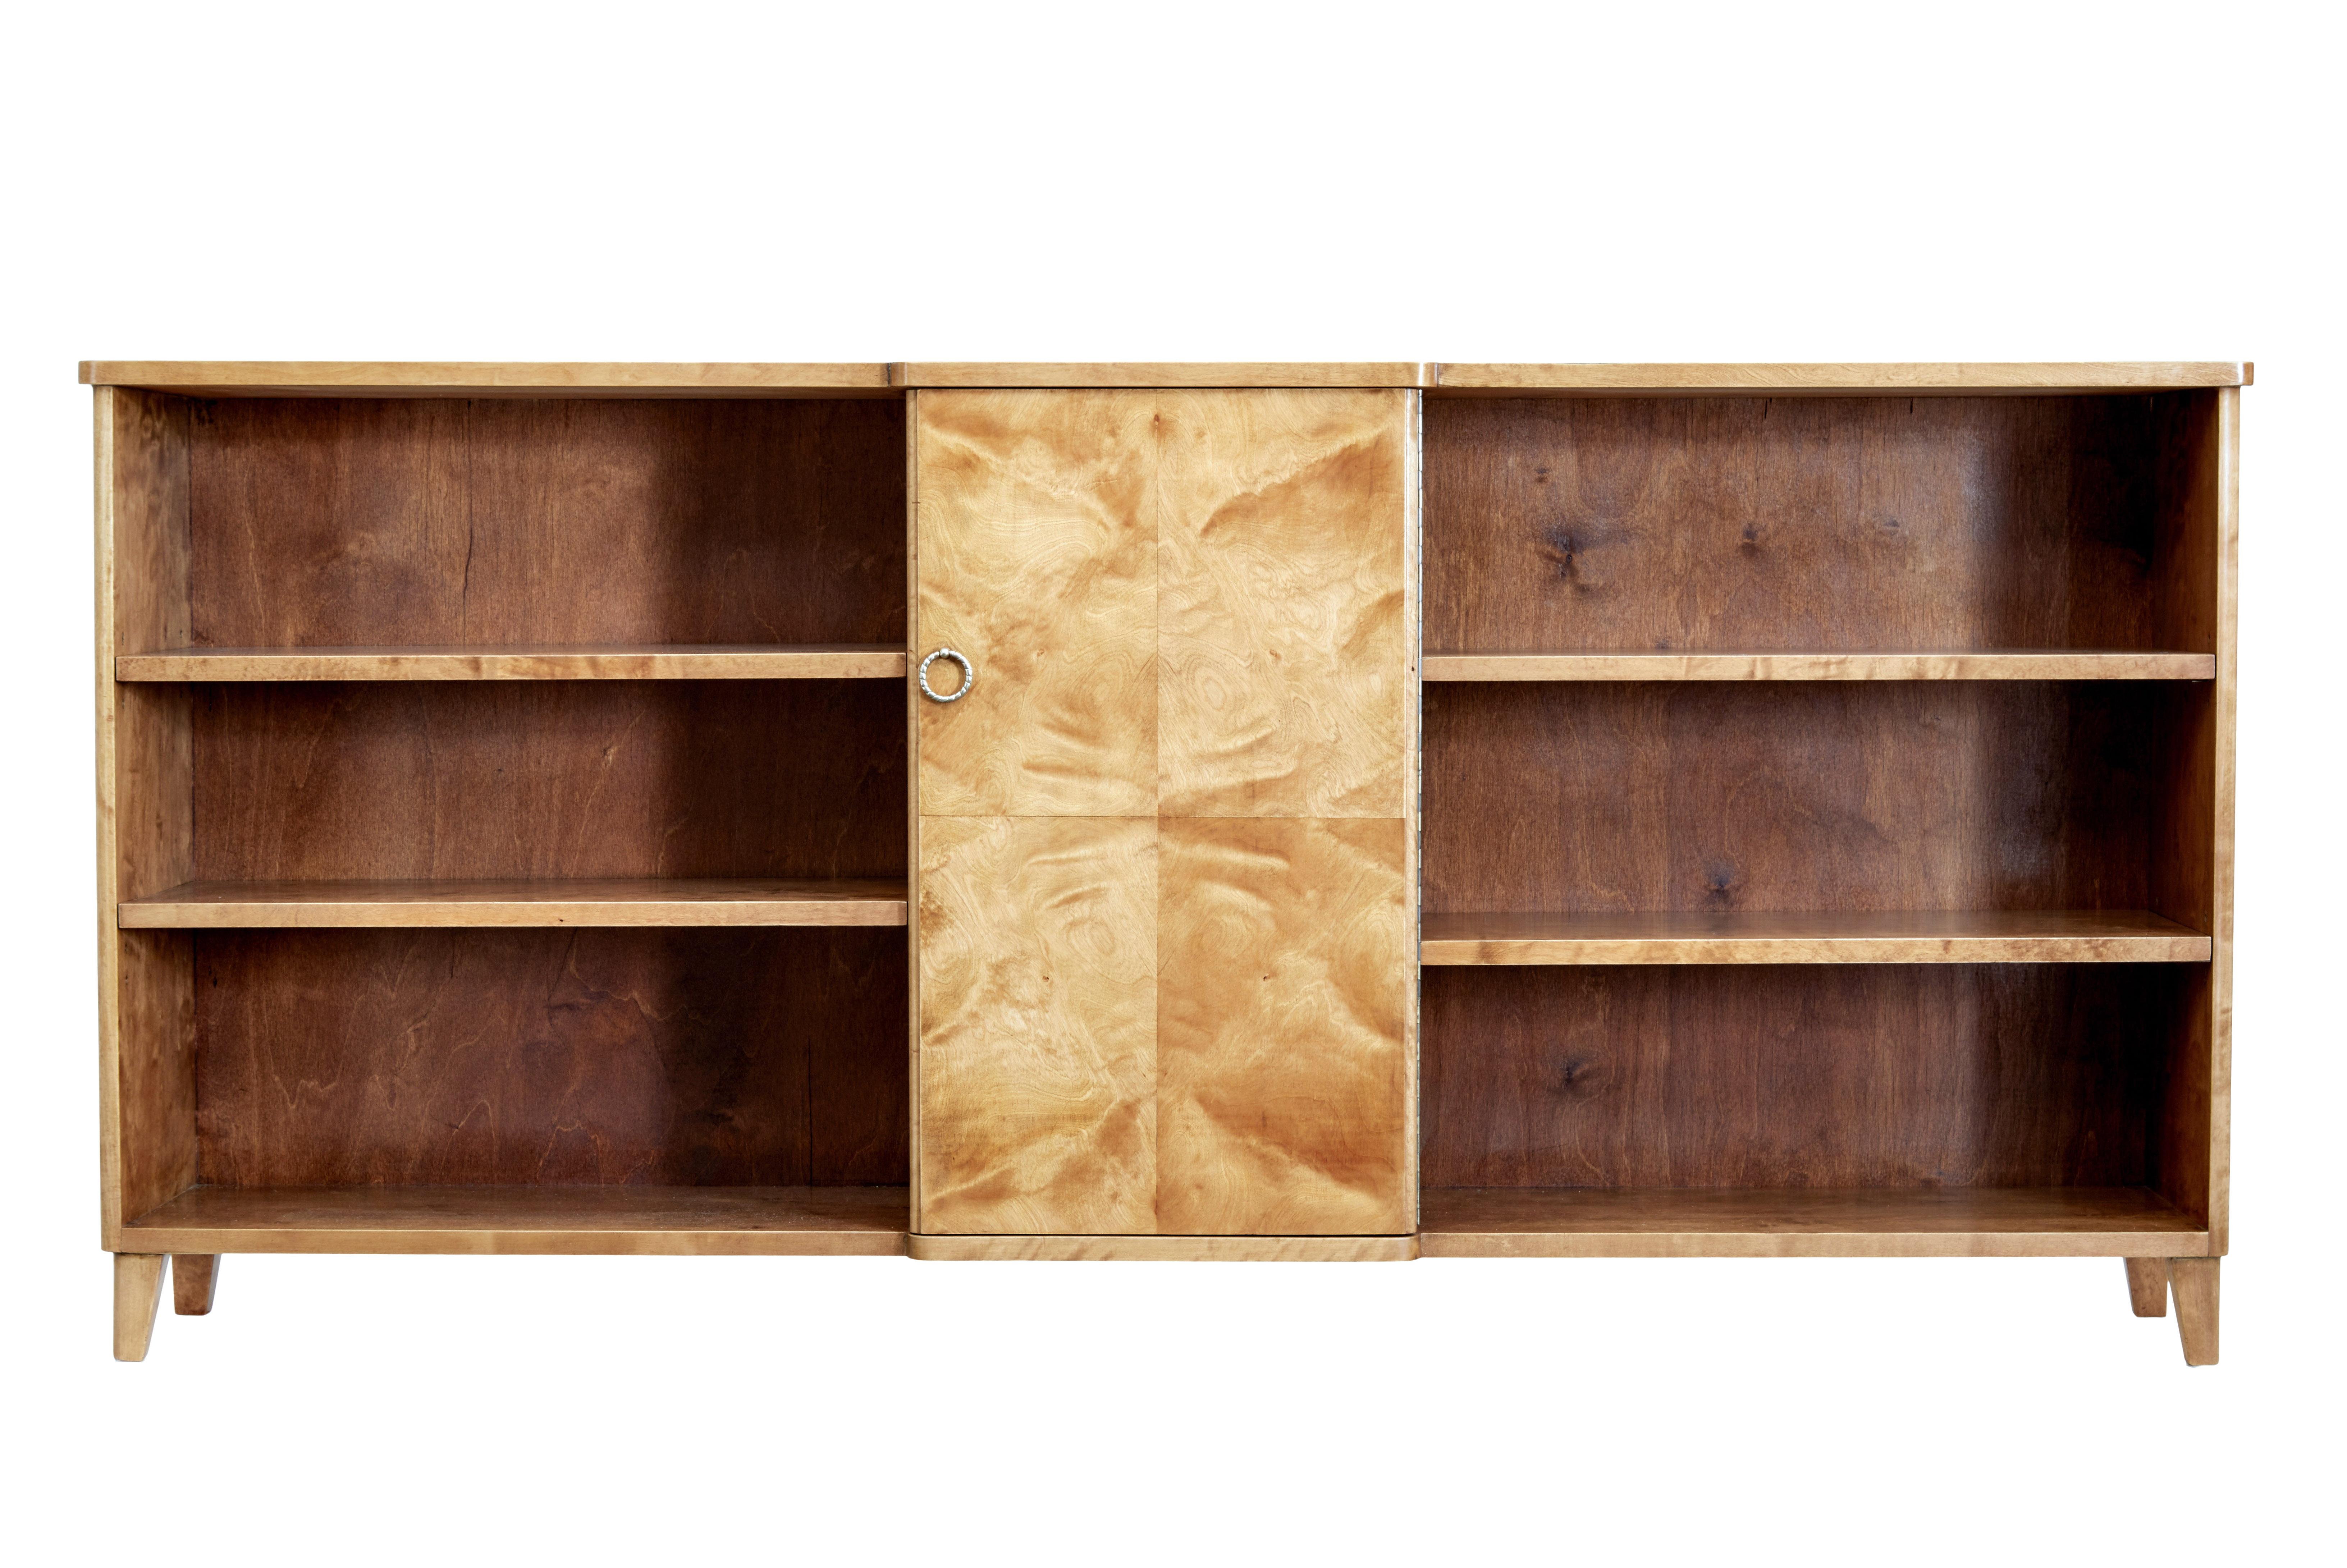 Scandinavian Mid-Century Modern birch low bookcase, circa 1950.

Stylish and practical piece of Swedish design, allowing maximum storage with minimum space.  This piece lends itself to being able to used in multiple rooms around the